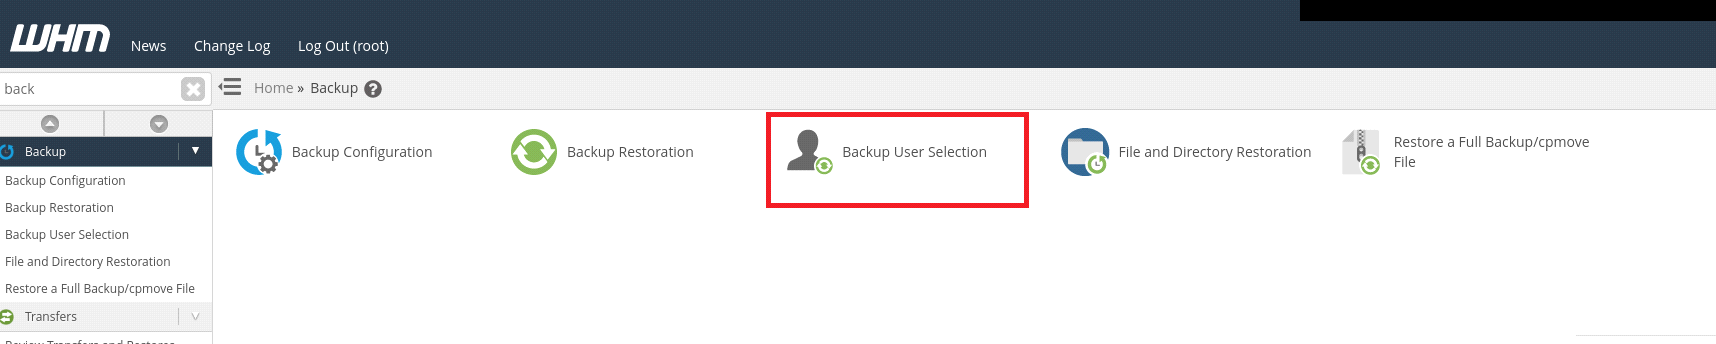 New cPanel feature - Backup User Selection